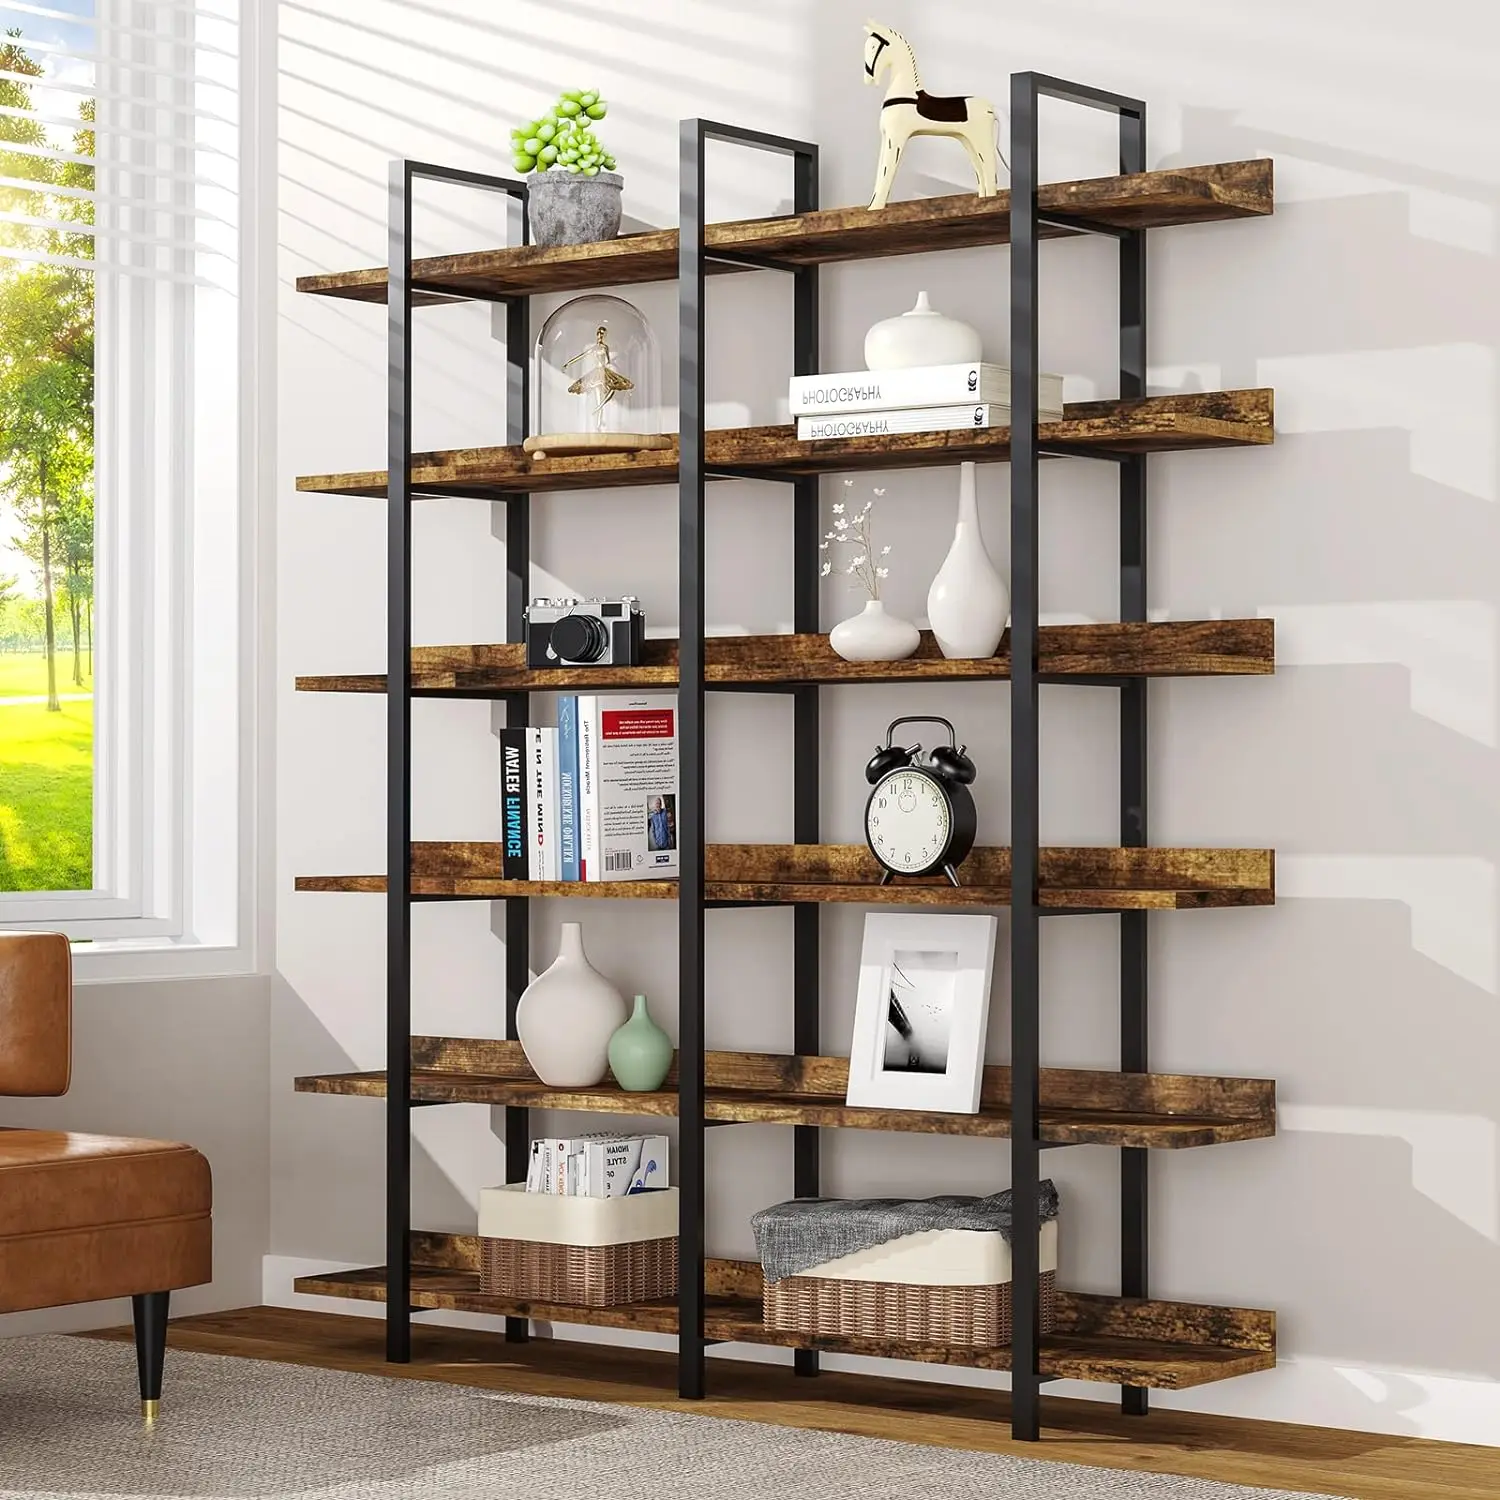 

FRAPOW 83Inch Industrial Bookshelf and Bookcase, Double Wide 6 Tier Large Vintage Book Shelf with Metal Frame